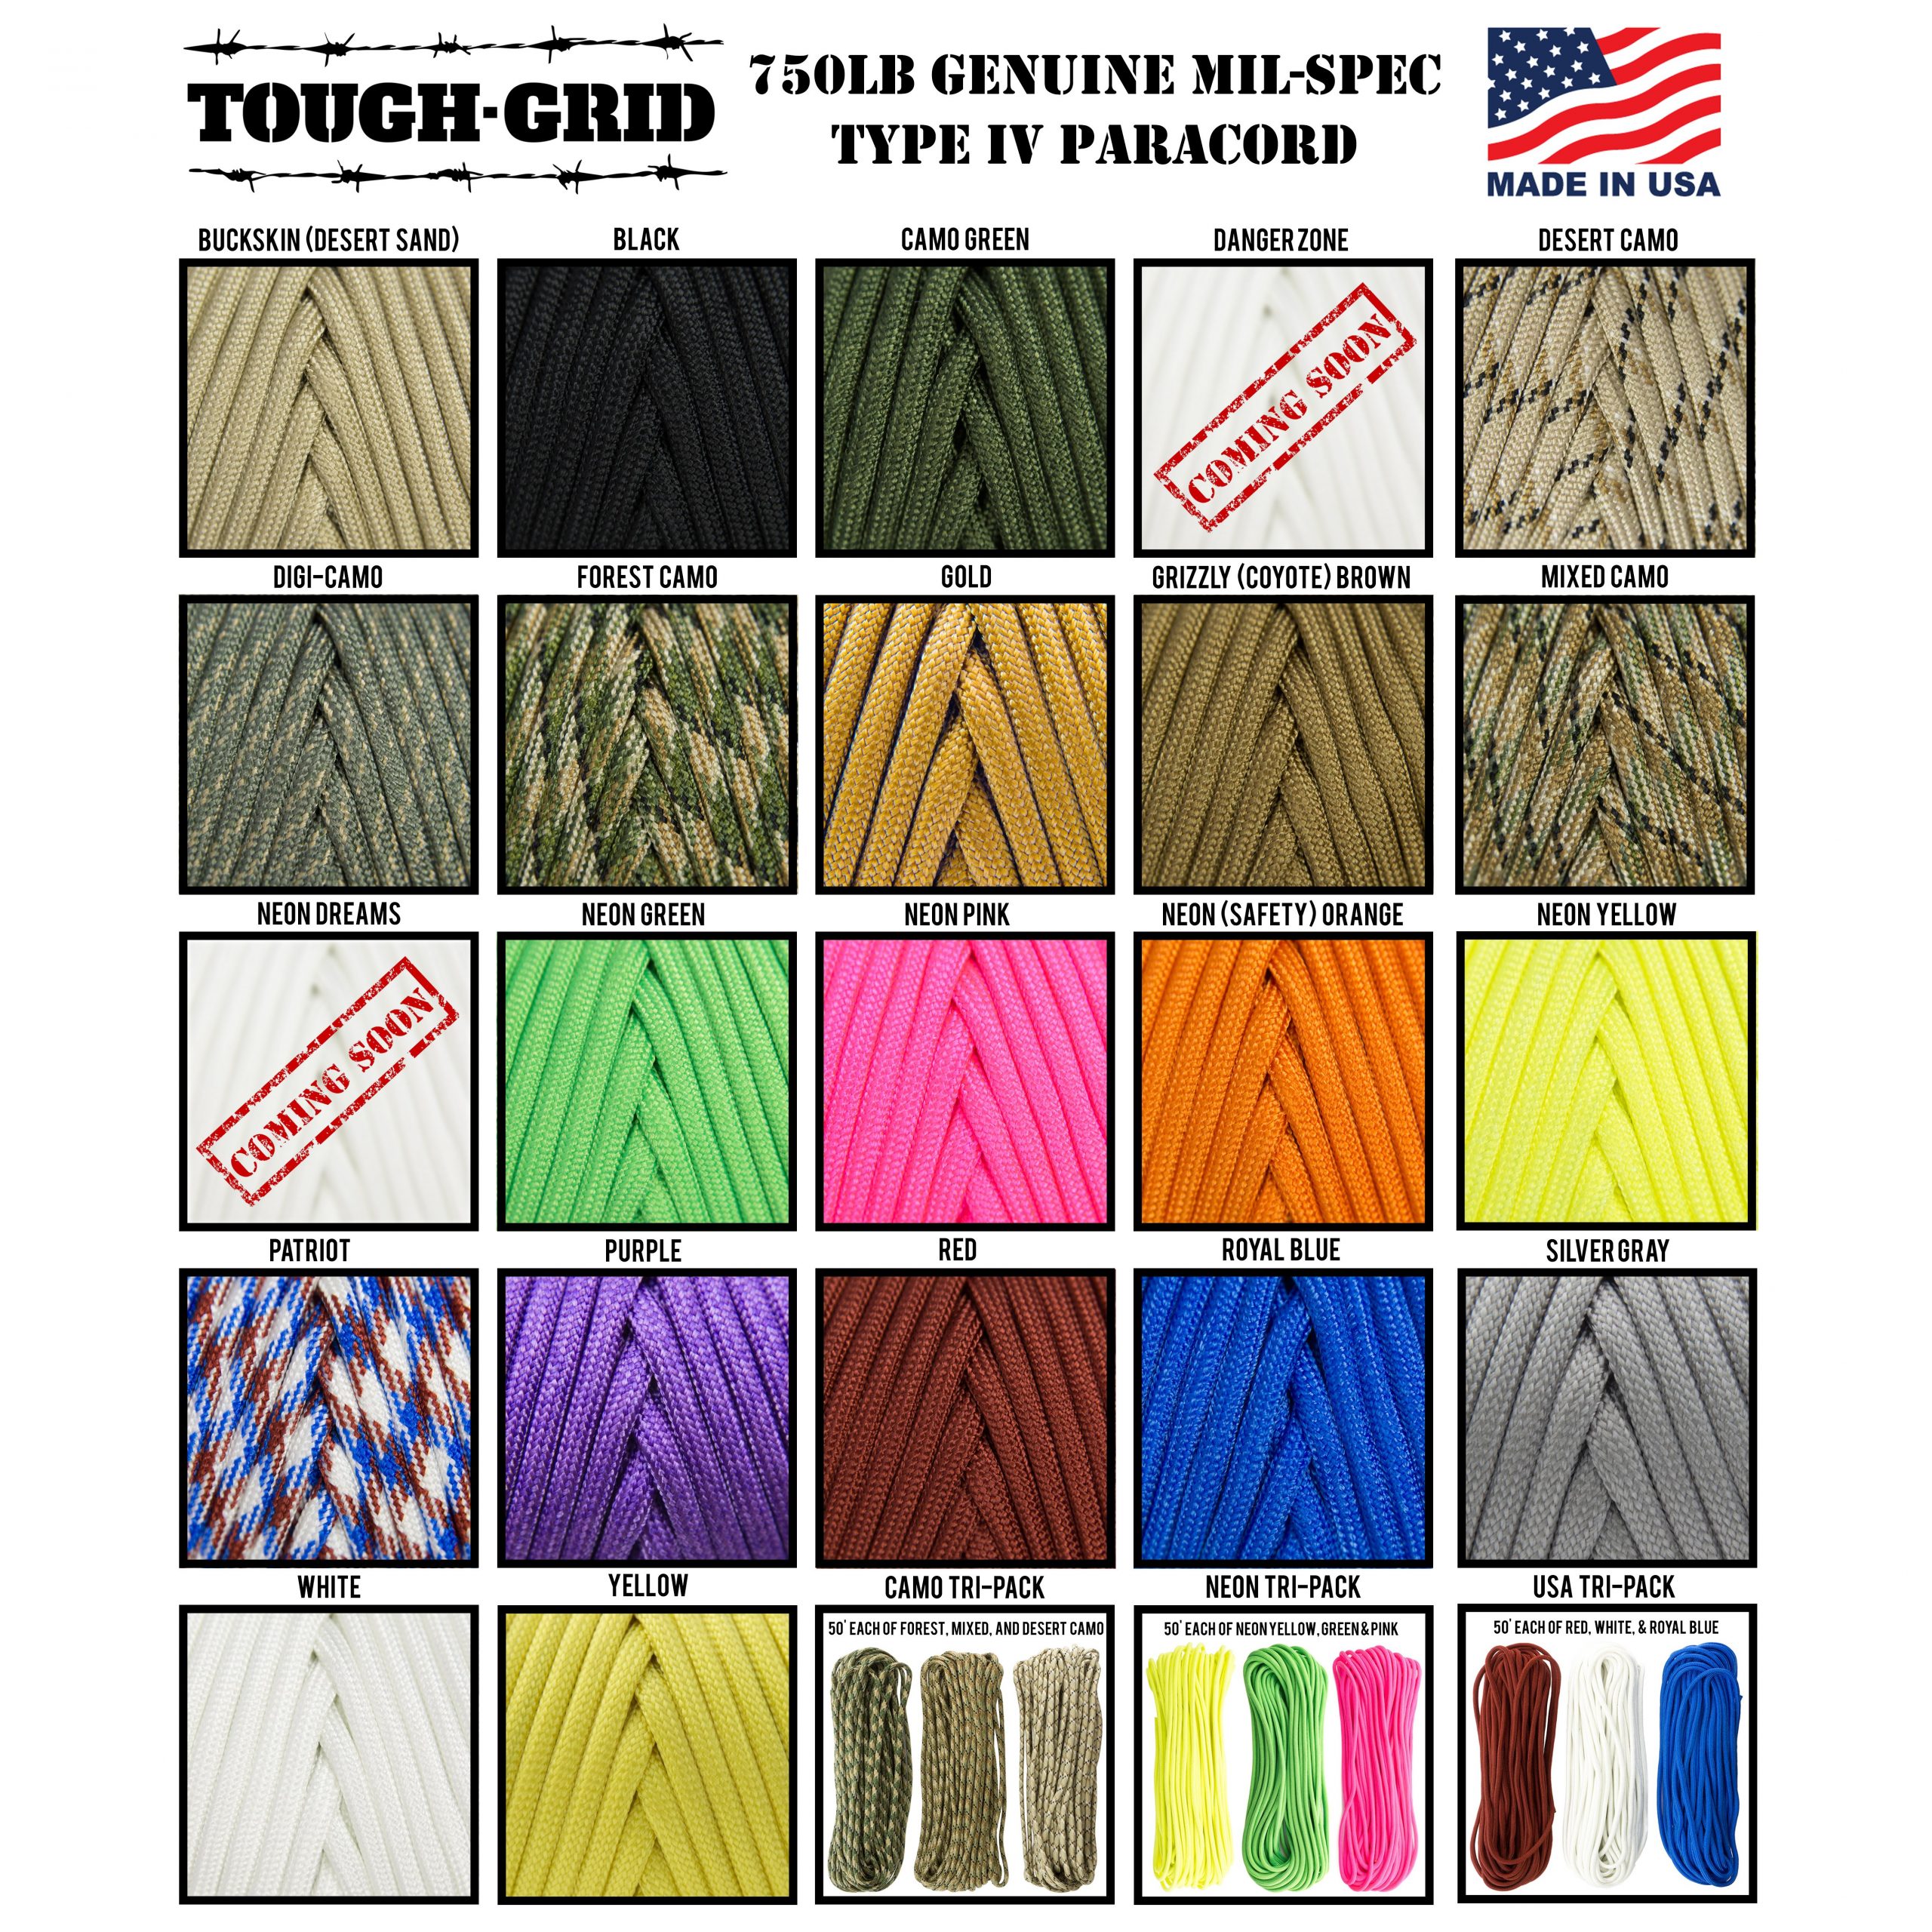 TOUGH-GRID 750lb Grizzly MIl-C-5040-H Coyote Grizzly Brown 200Ft Brown Paracord//Parachute Cord Genuine Mil Spec Type IV 750lb Paracord Used by The US Military - 100/% Nylon